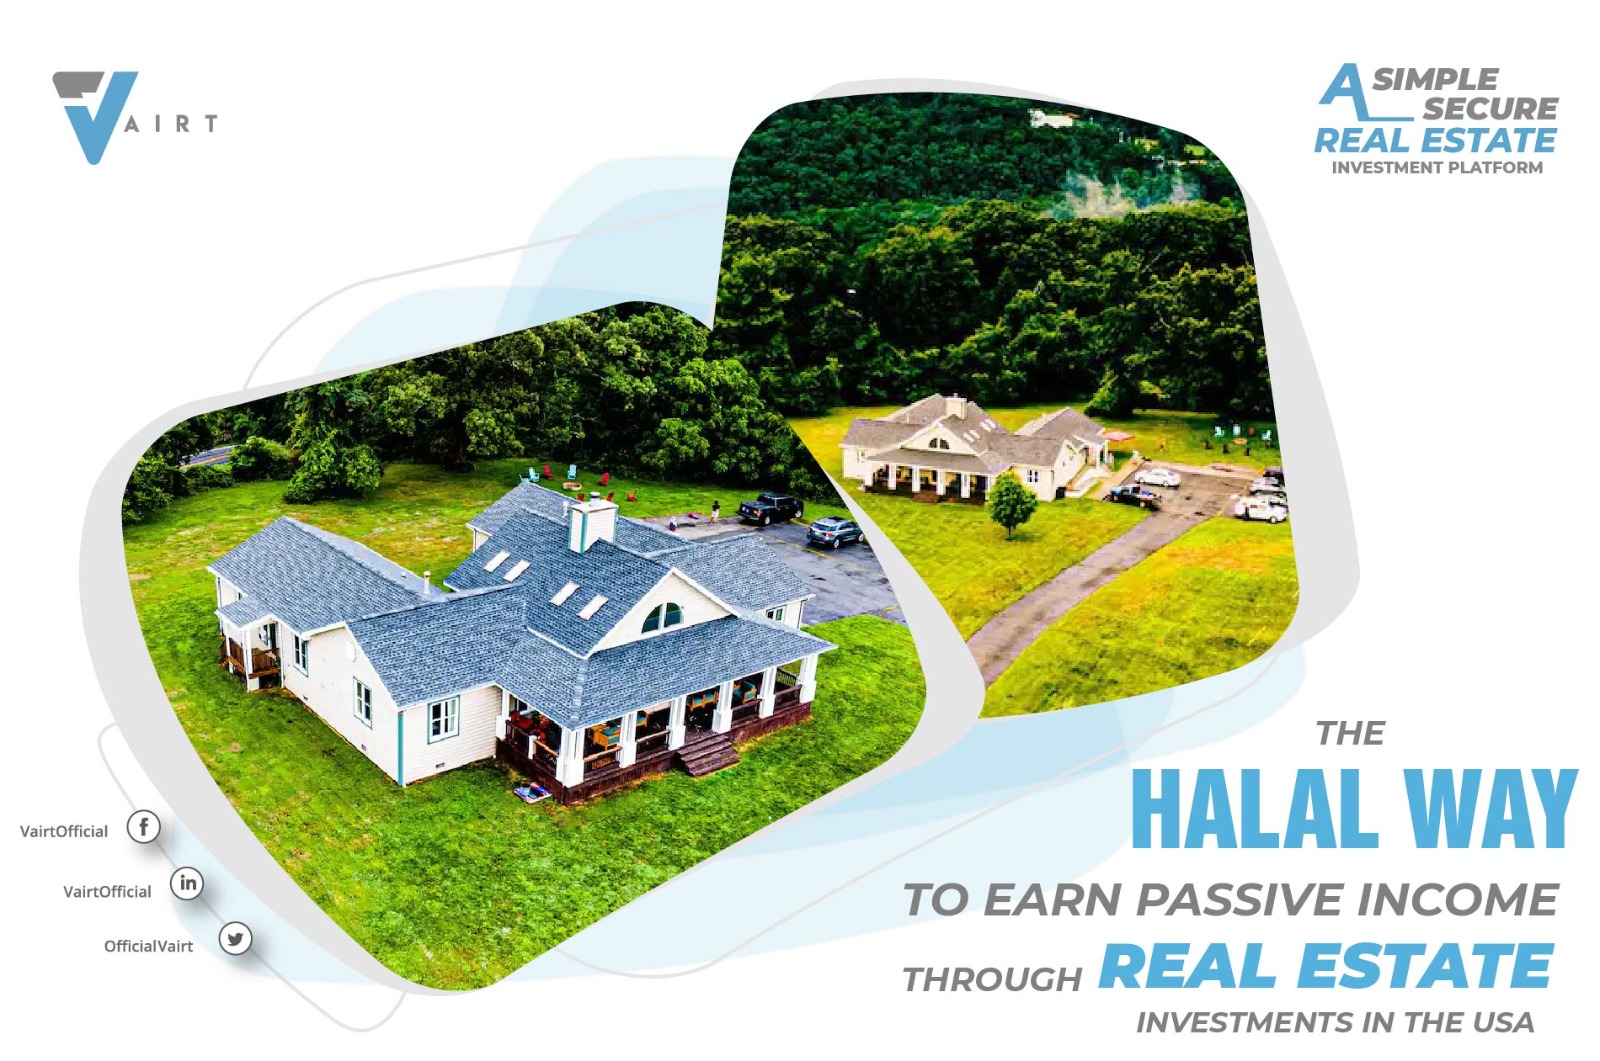 Halal Way to Earn Passive Income Through Real Estate Investments in the USA